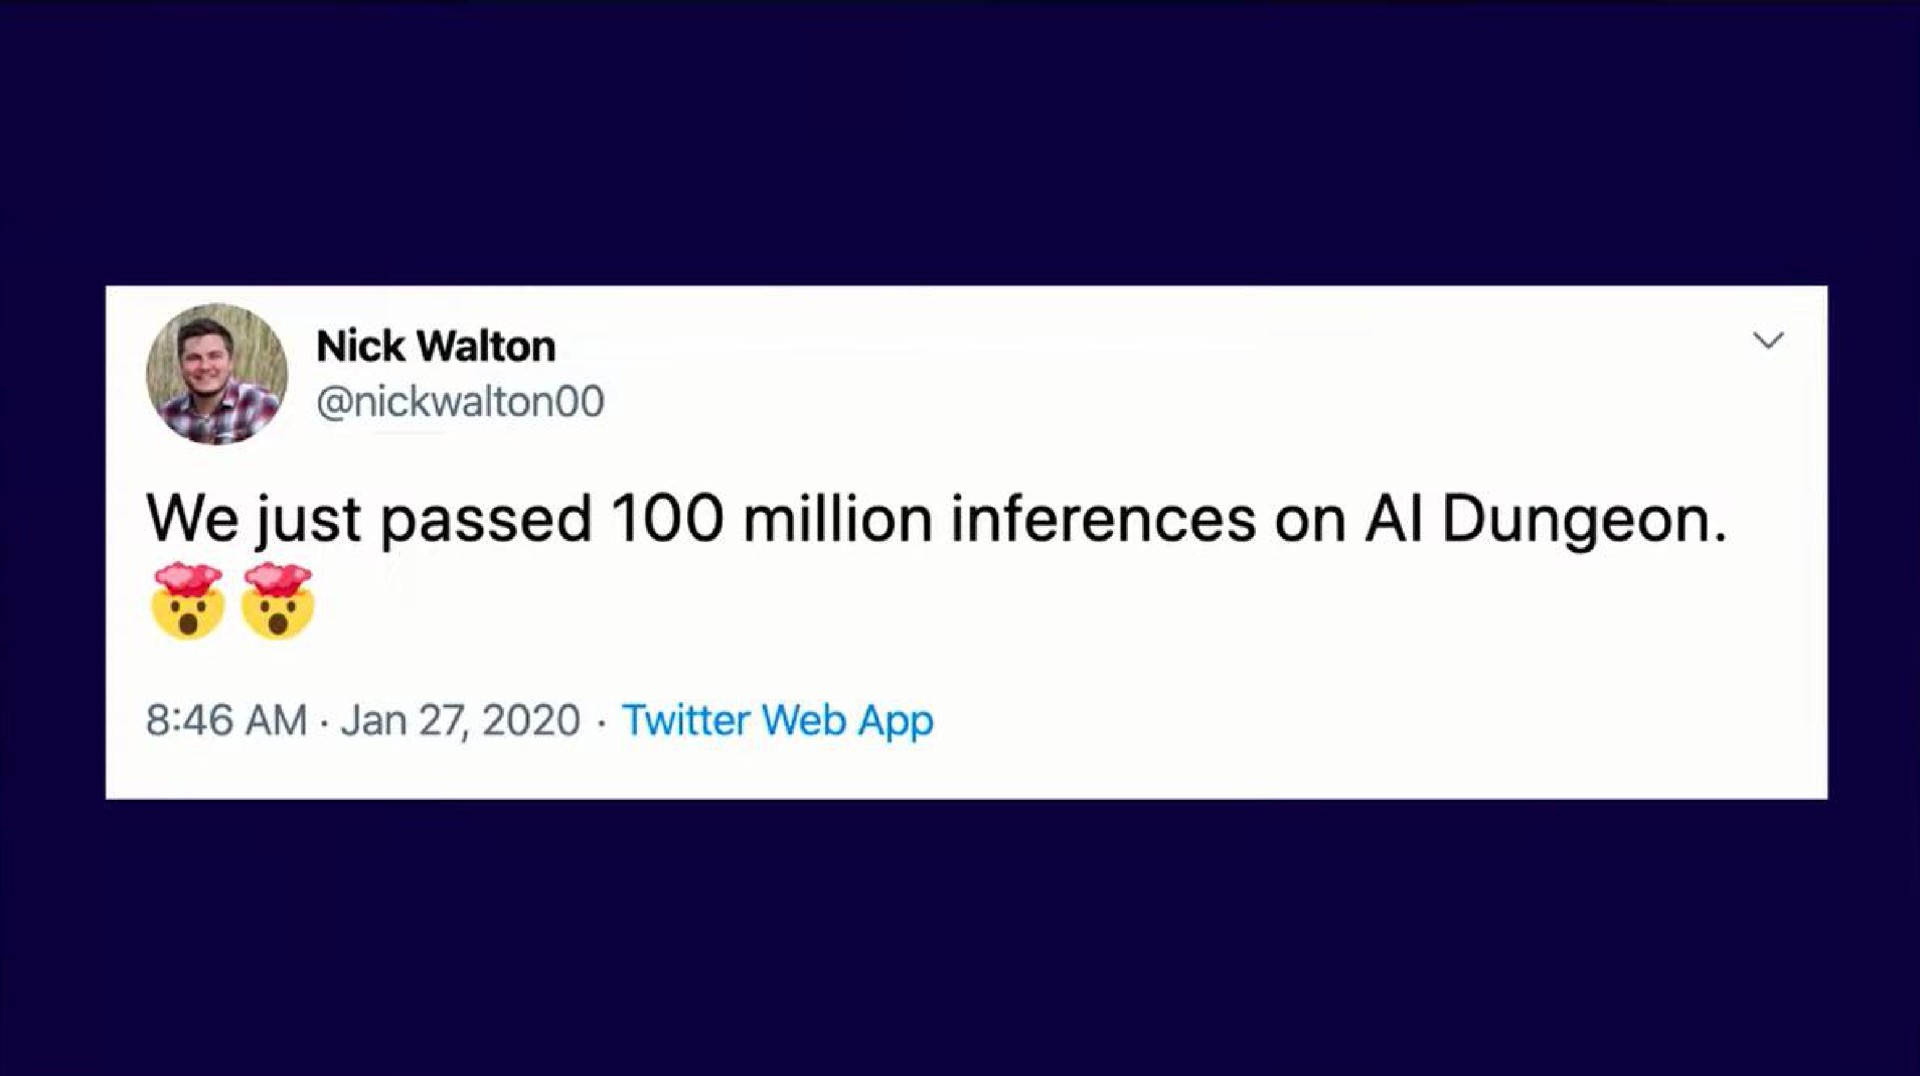 nick we just passed million inferences on dungeon am twitter web | OpenAI